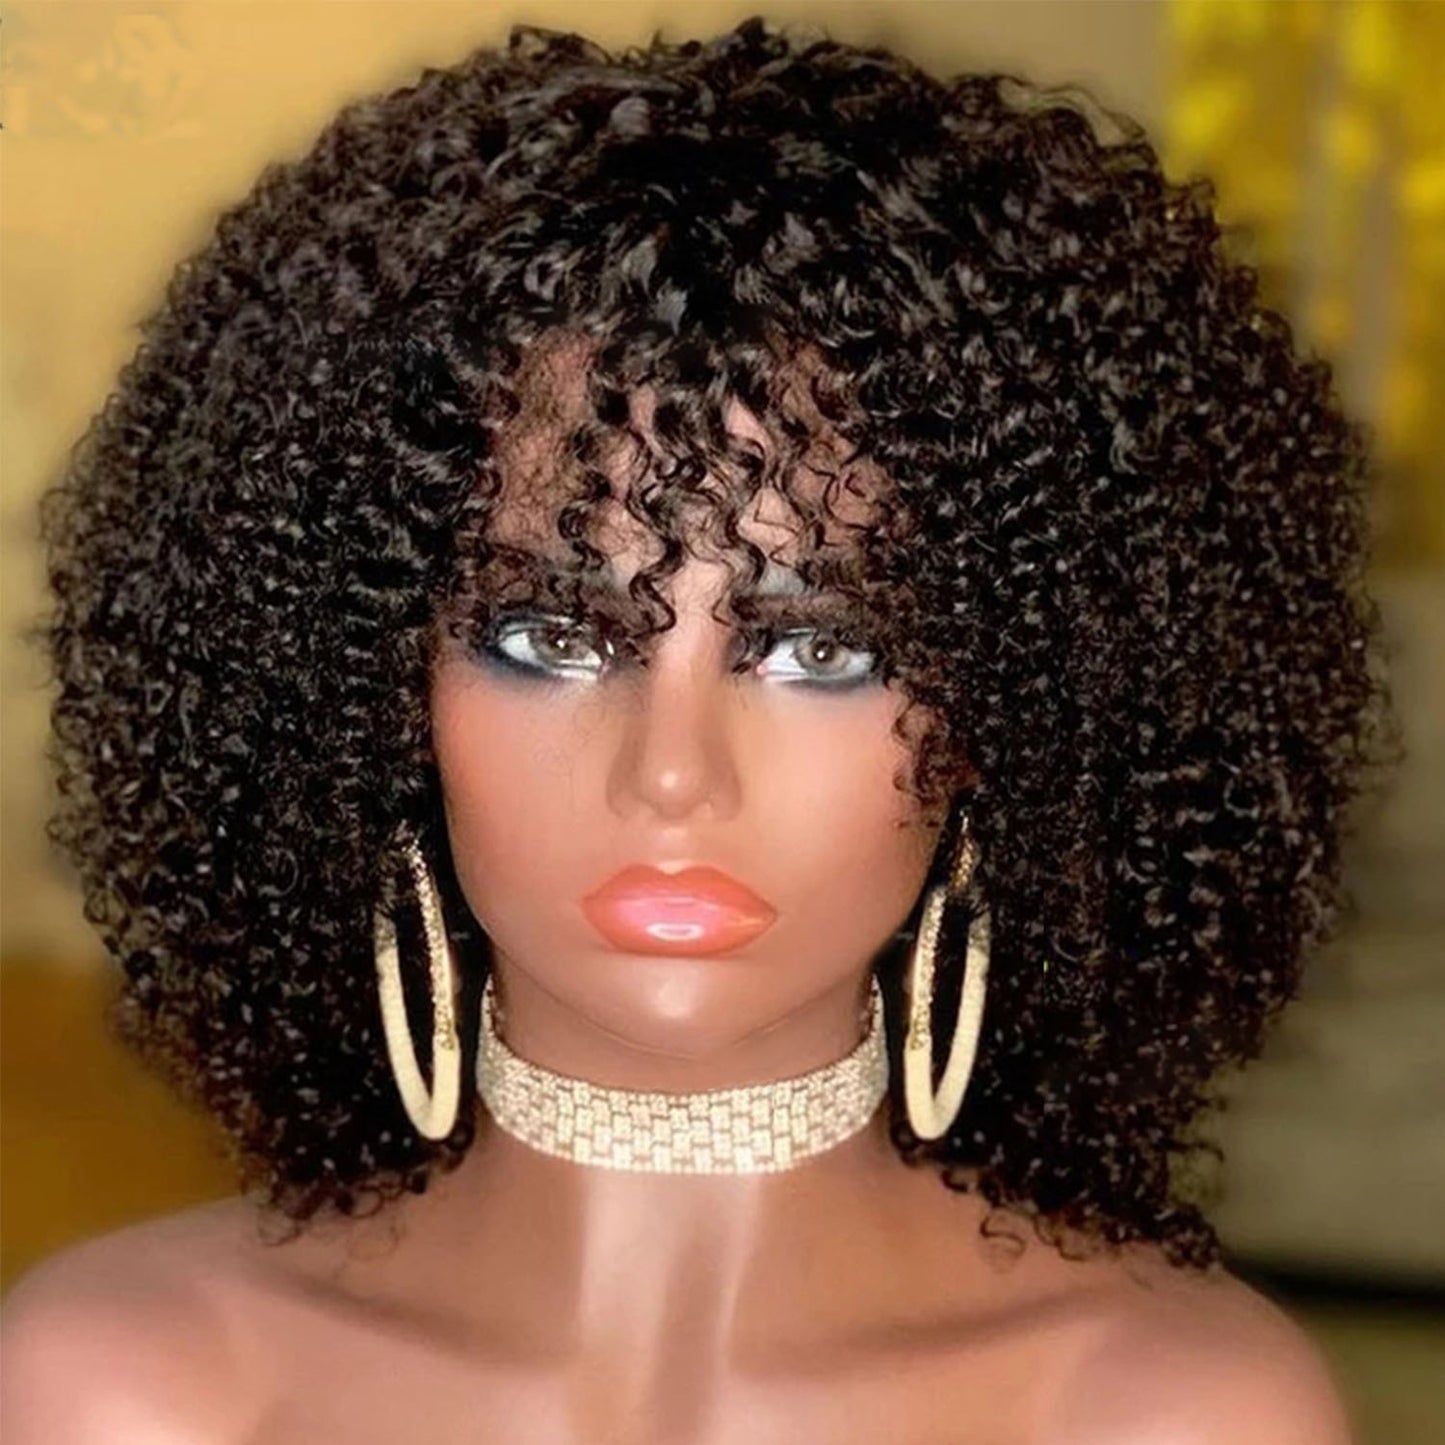 Afro Kinky Curly Human Hair Wigs with Bangs Short bob